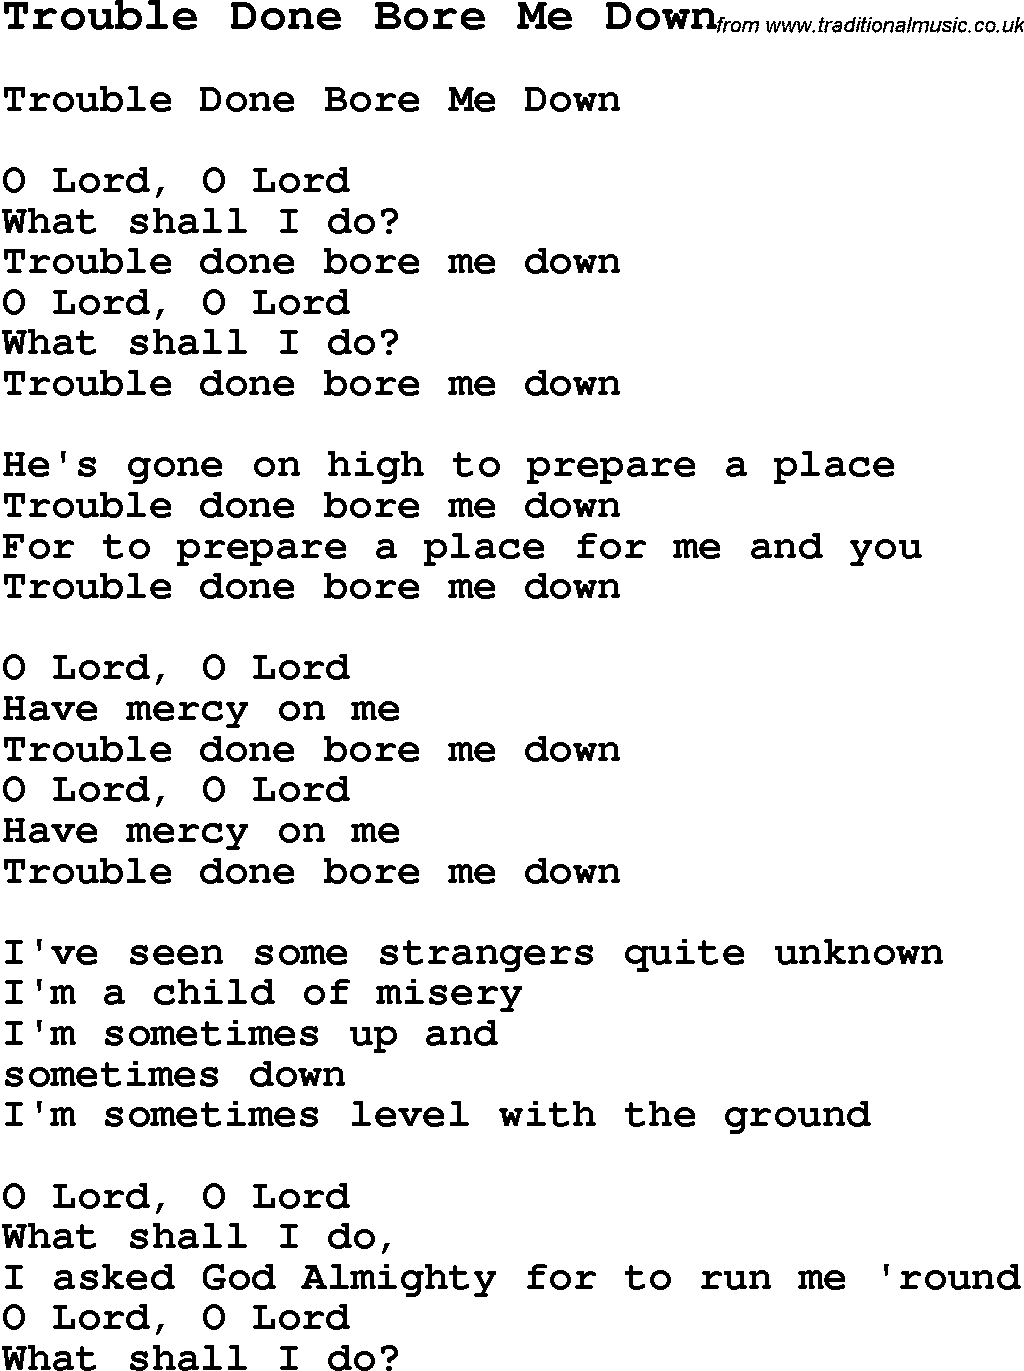 Negro Spiritual Song Lyrics for Trouble Done Bore Me Down